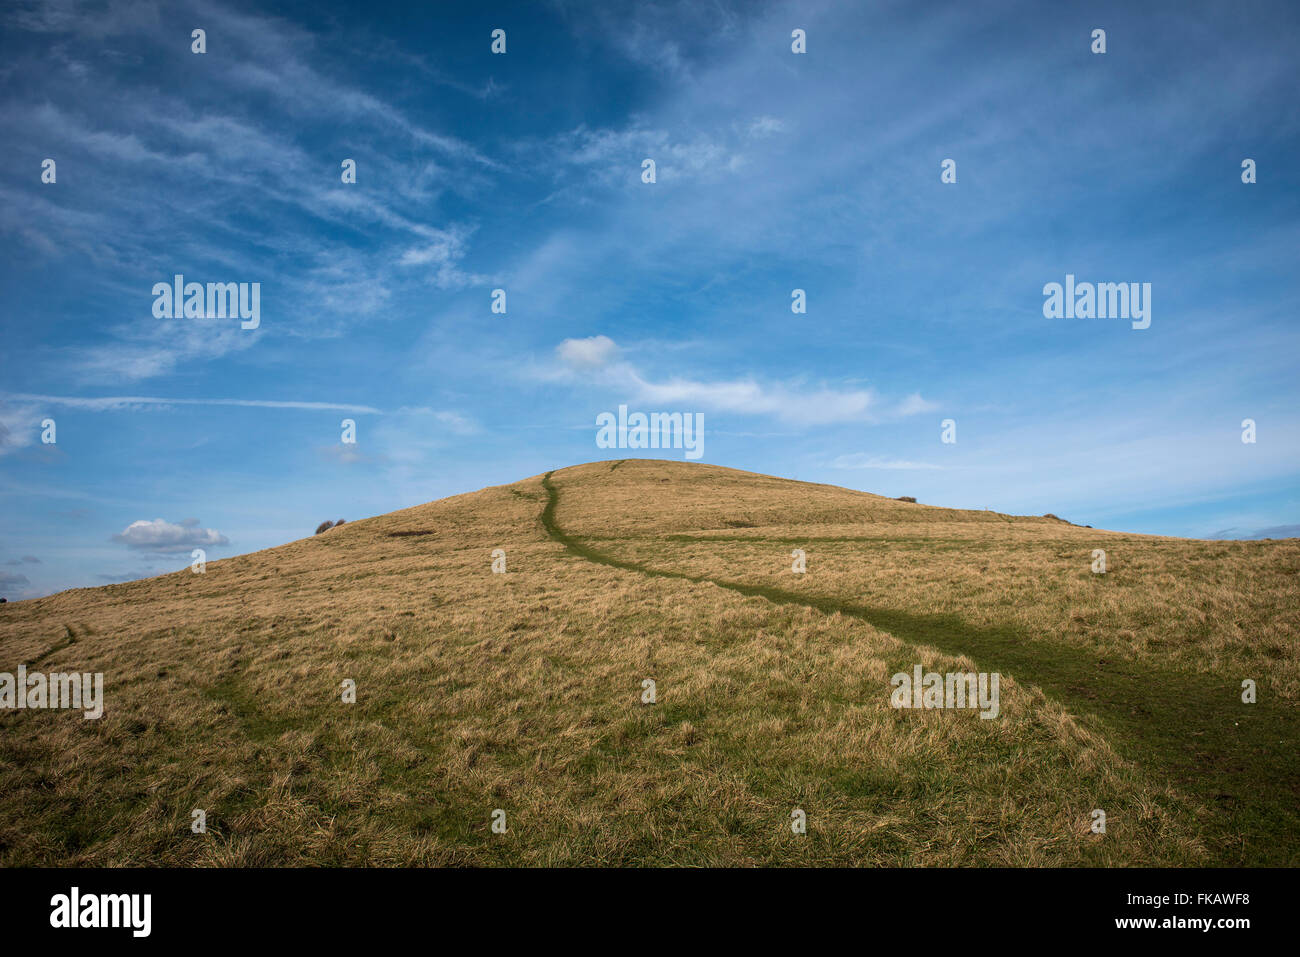 East Man Hill near the village of Worth Matravers and Winspit Quarry in the Isle of Purbeck, Dorset, UK Stock Photo